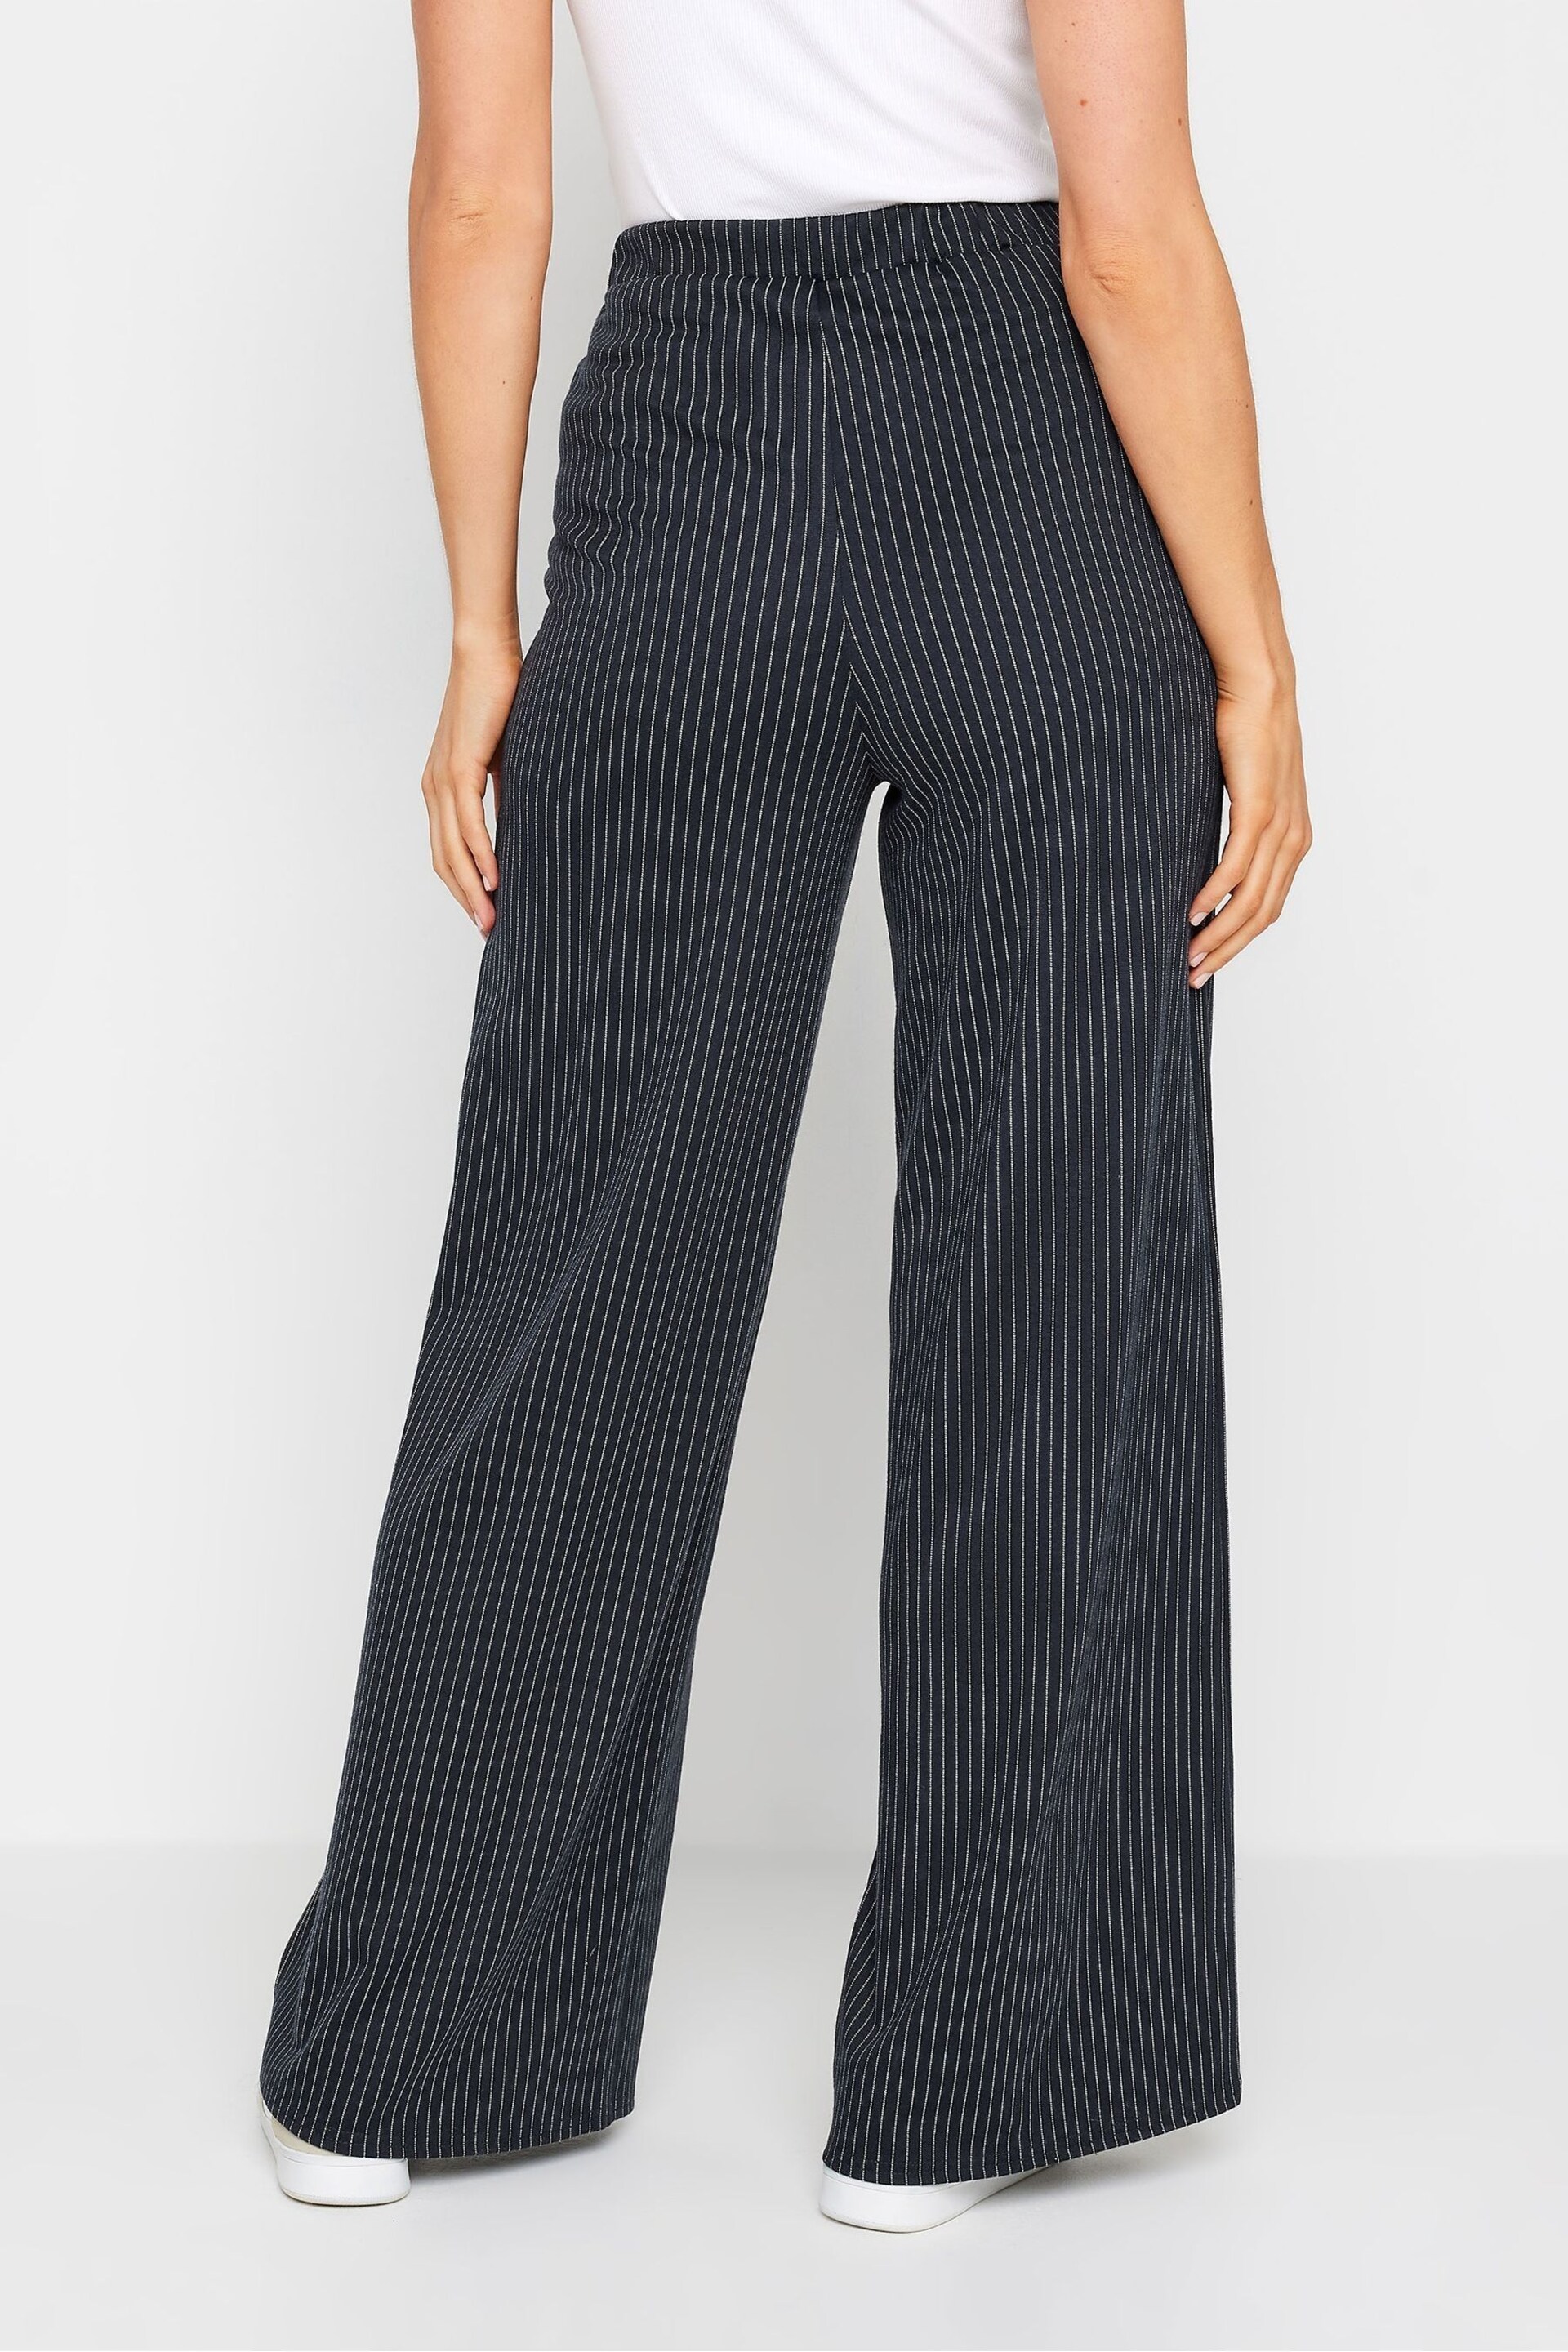 Long Tall Sally Blue Pinstripe Wide Leg Trousers - Image 3 of 5